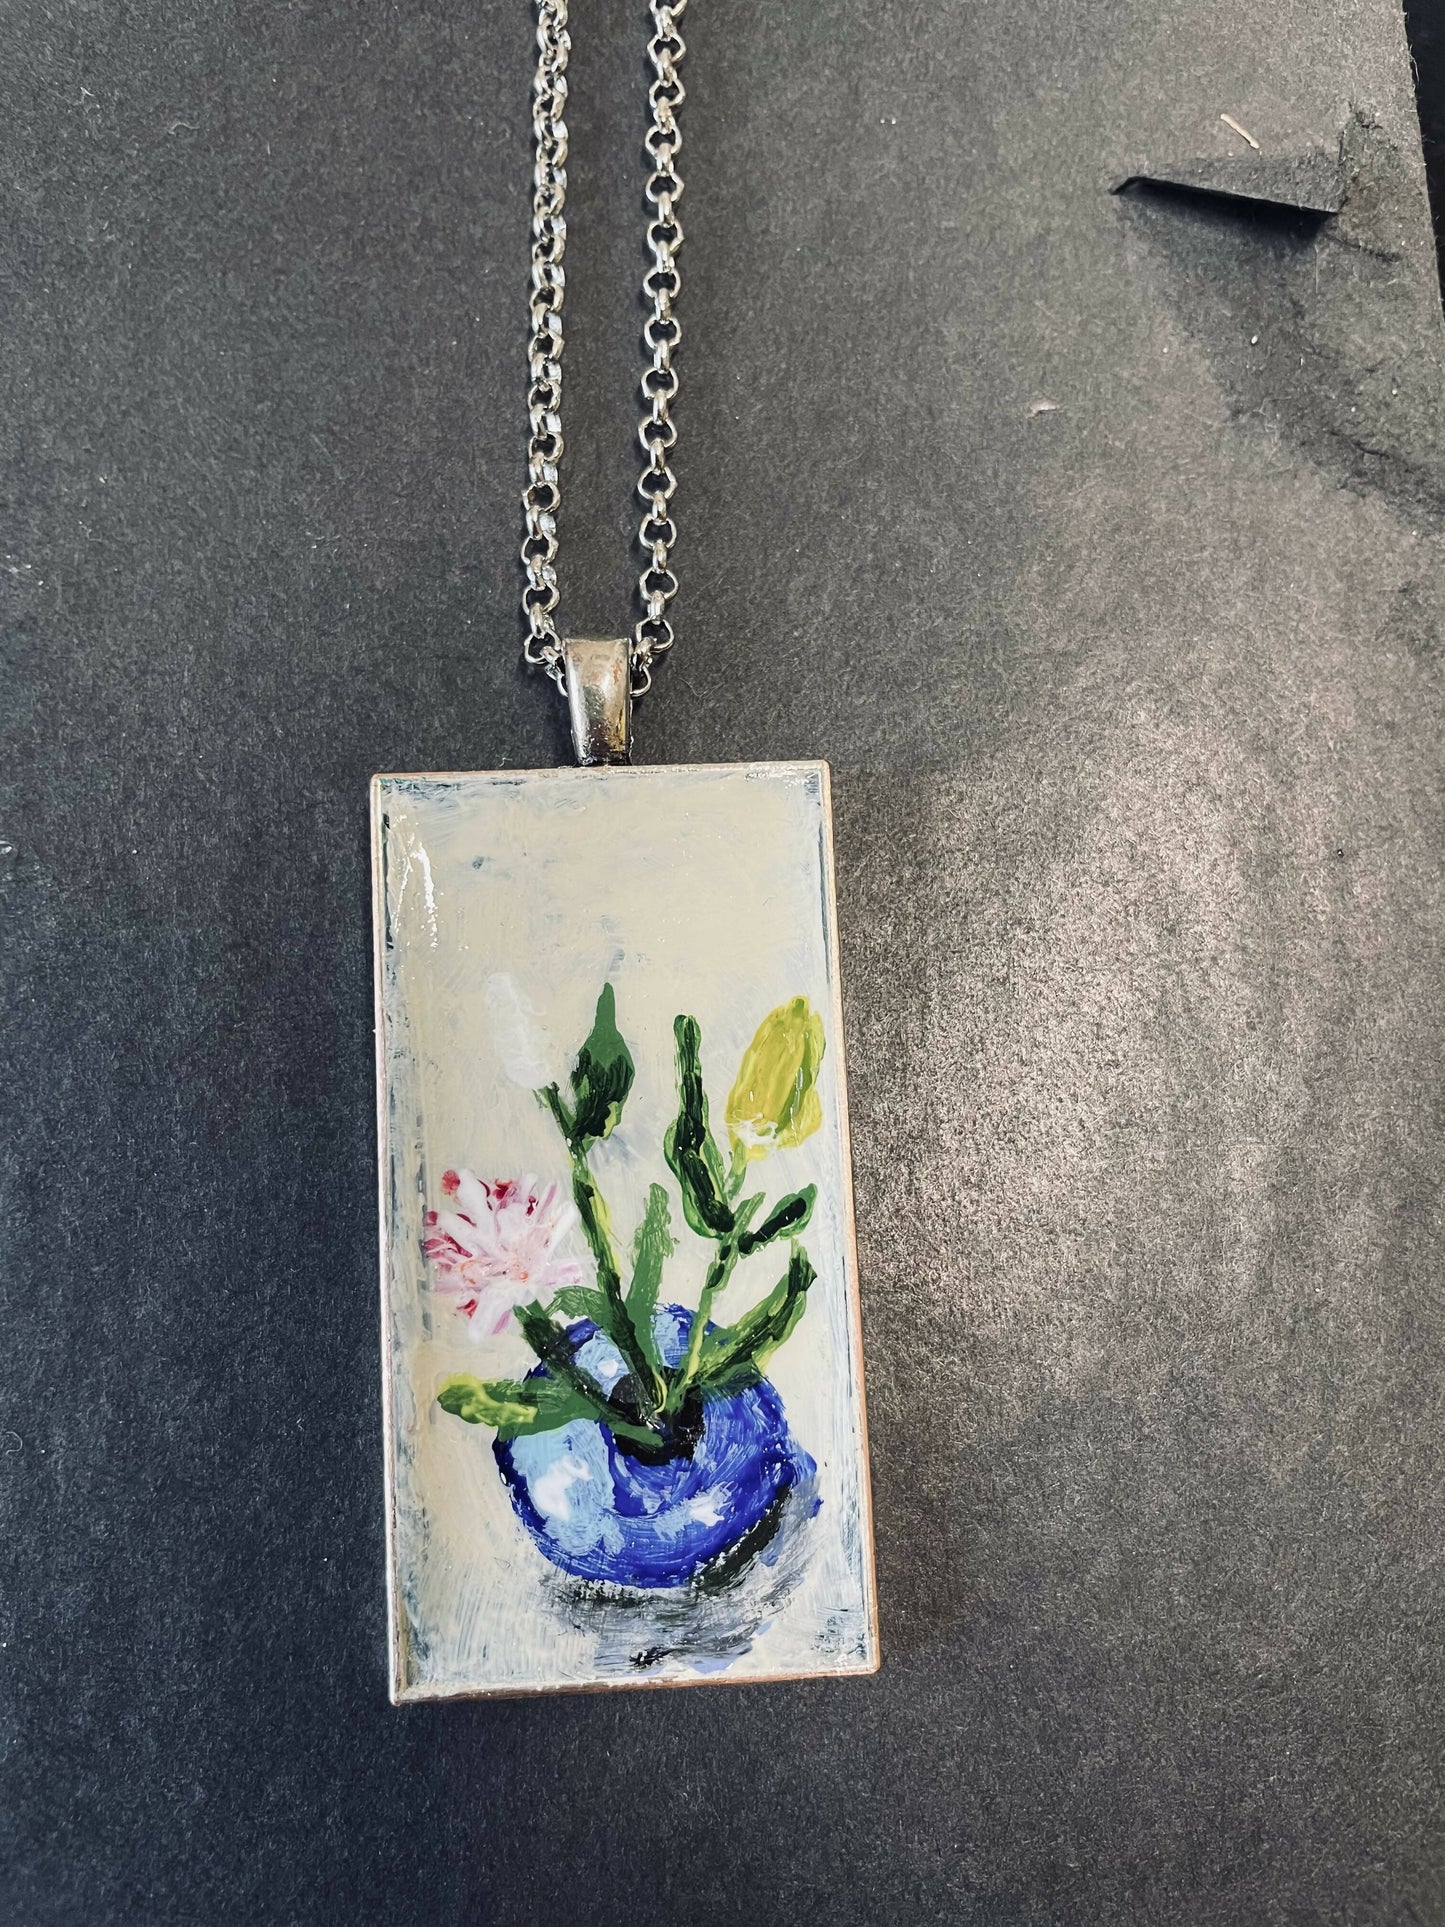 Tiny still-life one-of-a-kind painted art necklace